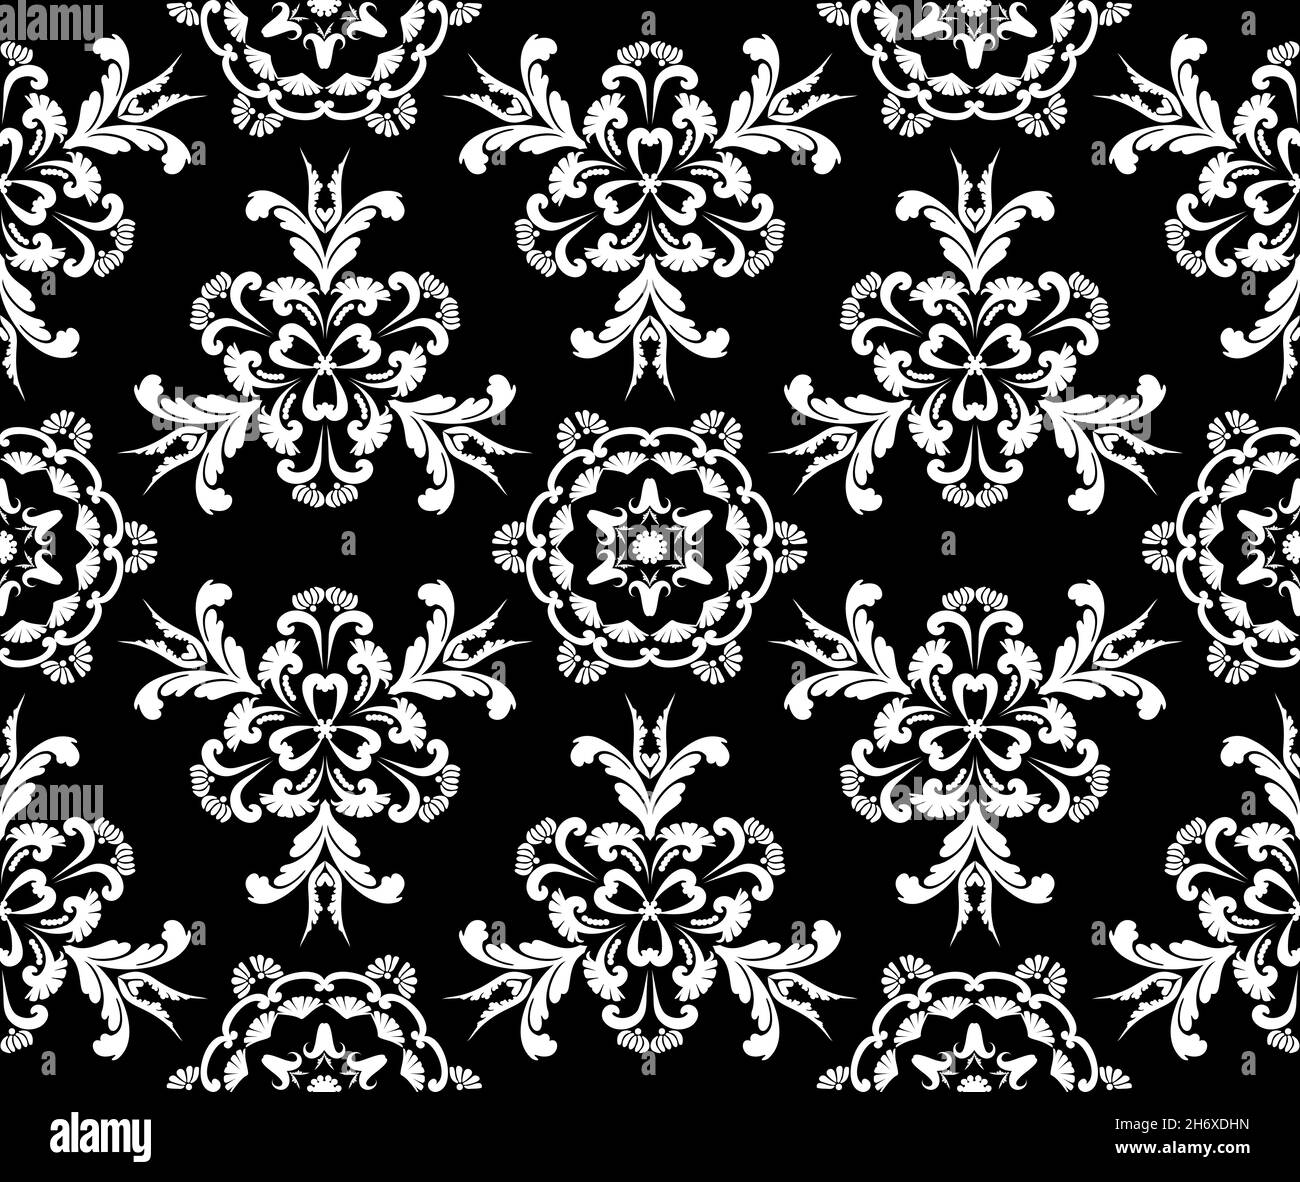 Vector template with white rococo flowers on black background. Vintage Victorian damask. Seamless abstract pattern. For textiles wallpaper tiles or Stock Vector